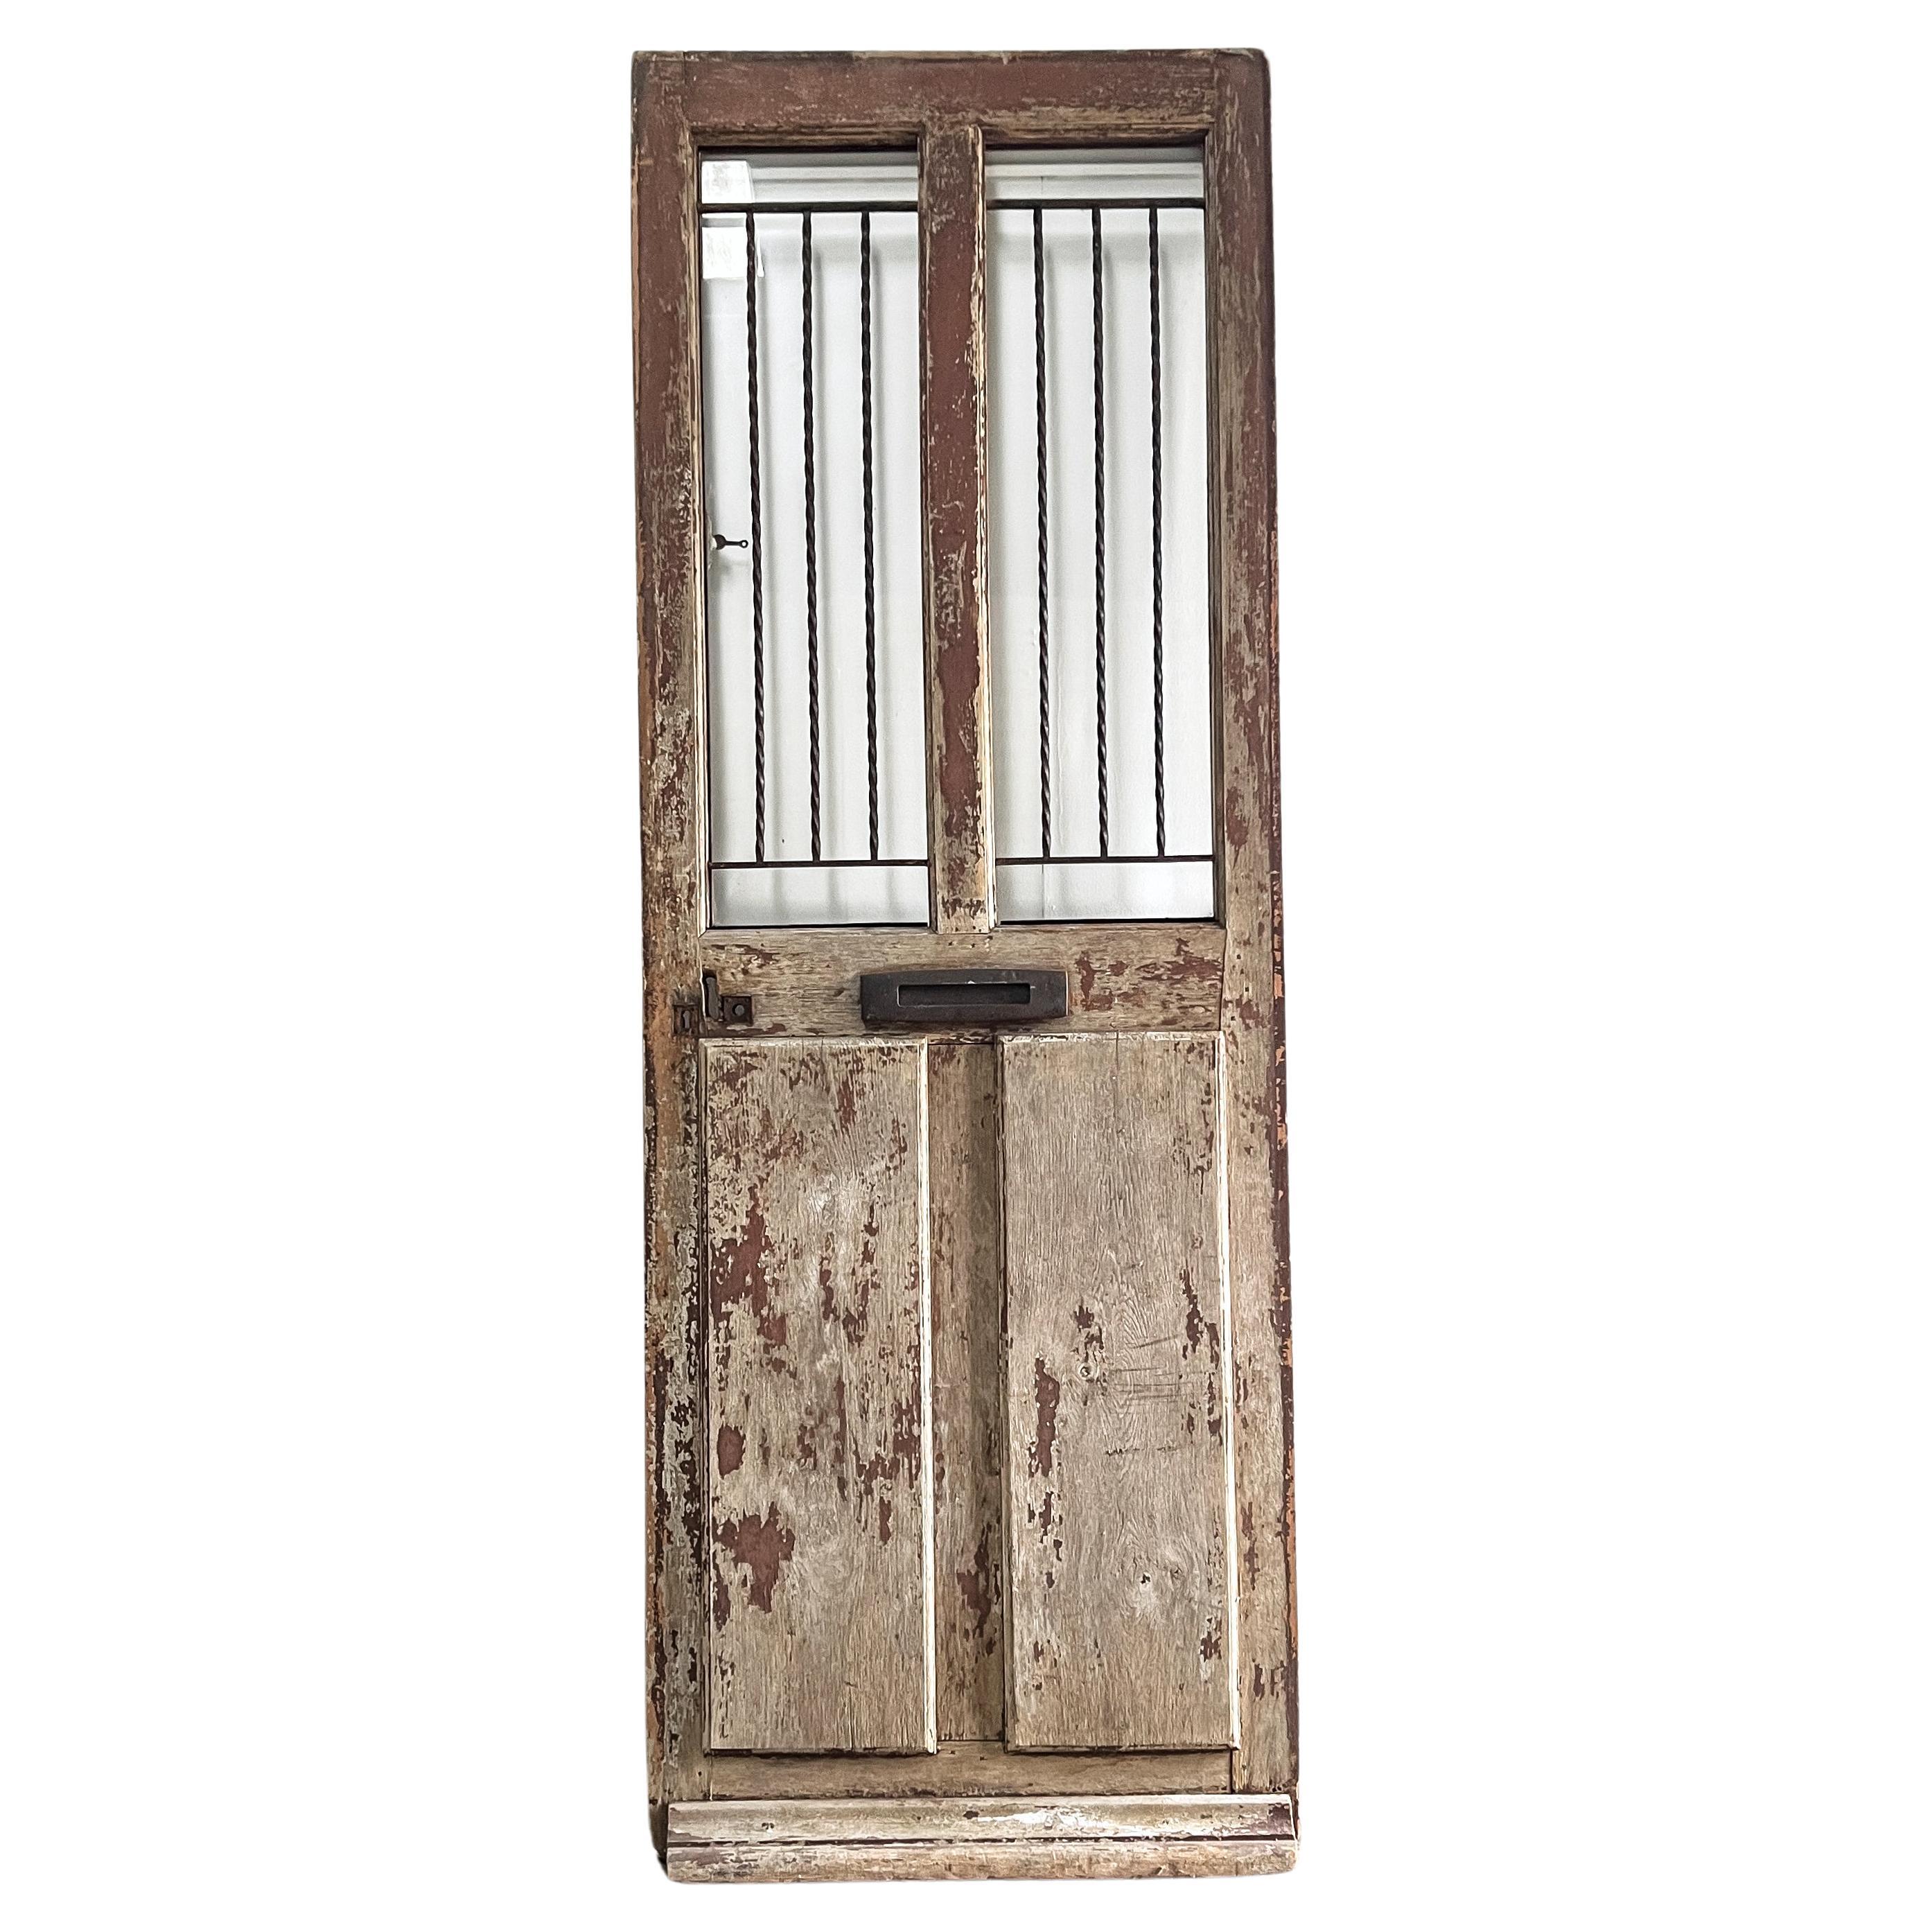 19th Century French Exterior Door with Iron Grille